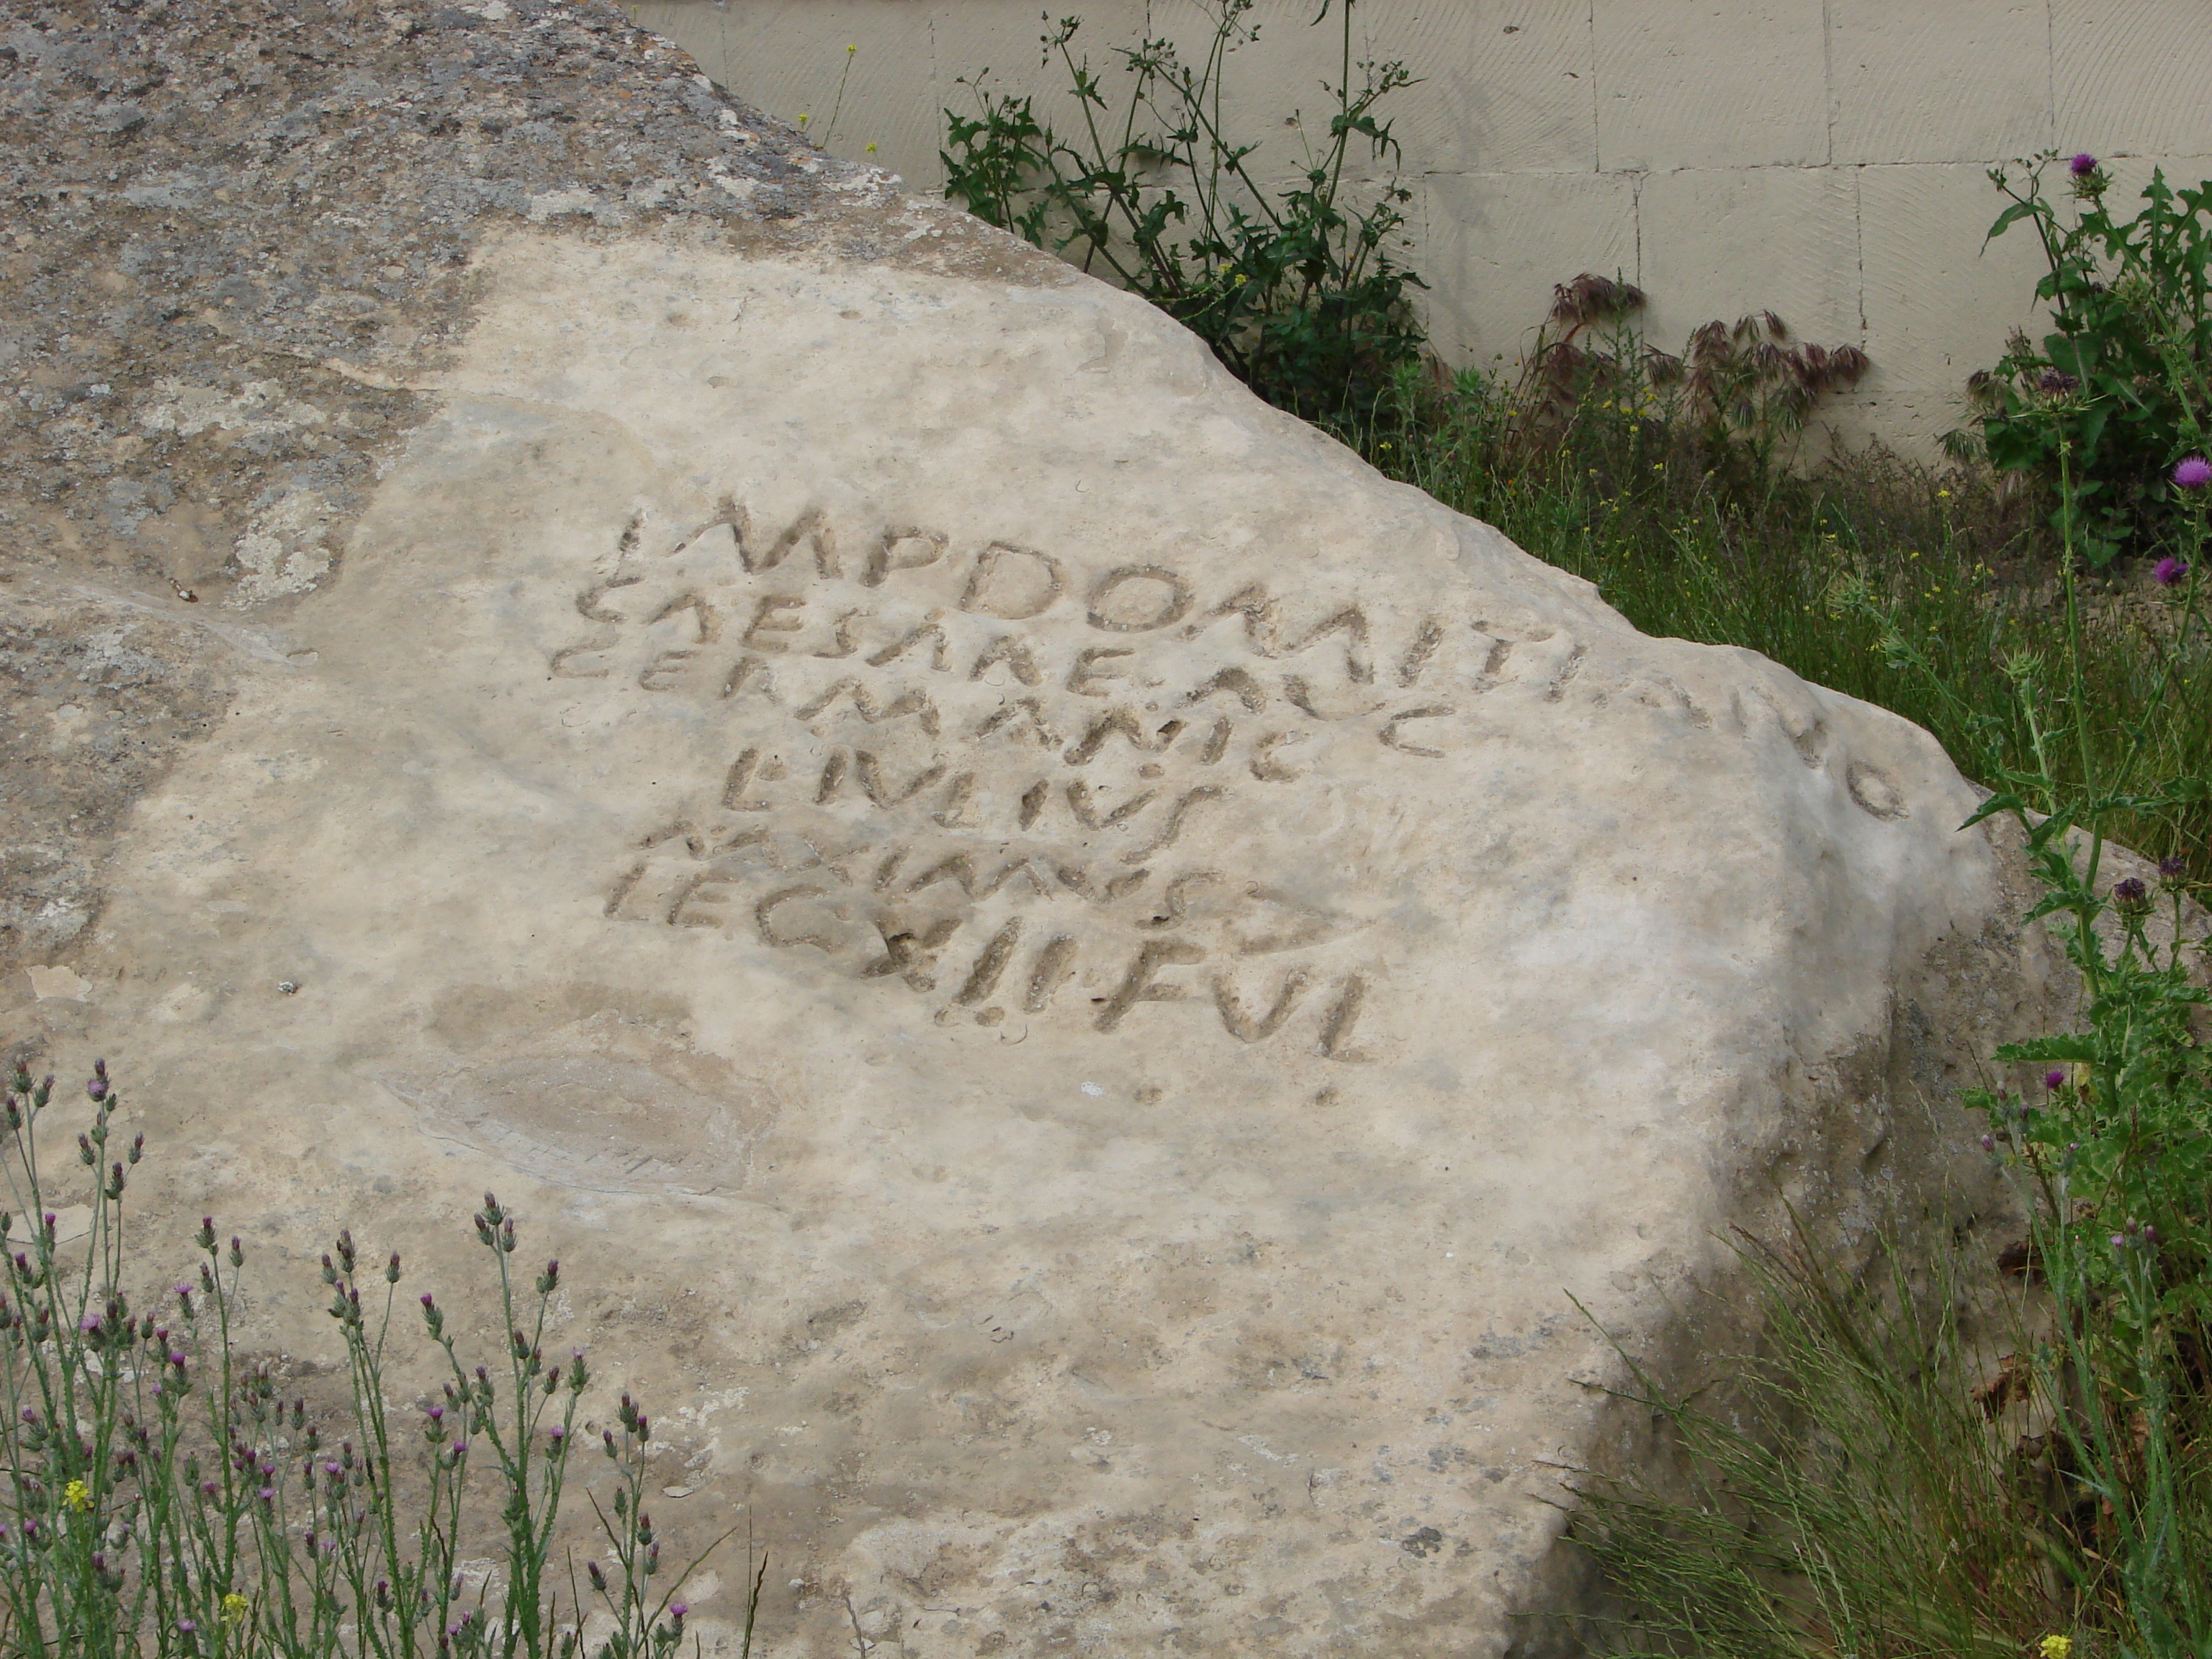 Gobustan's mysterious inscriptions made by Romans